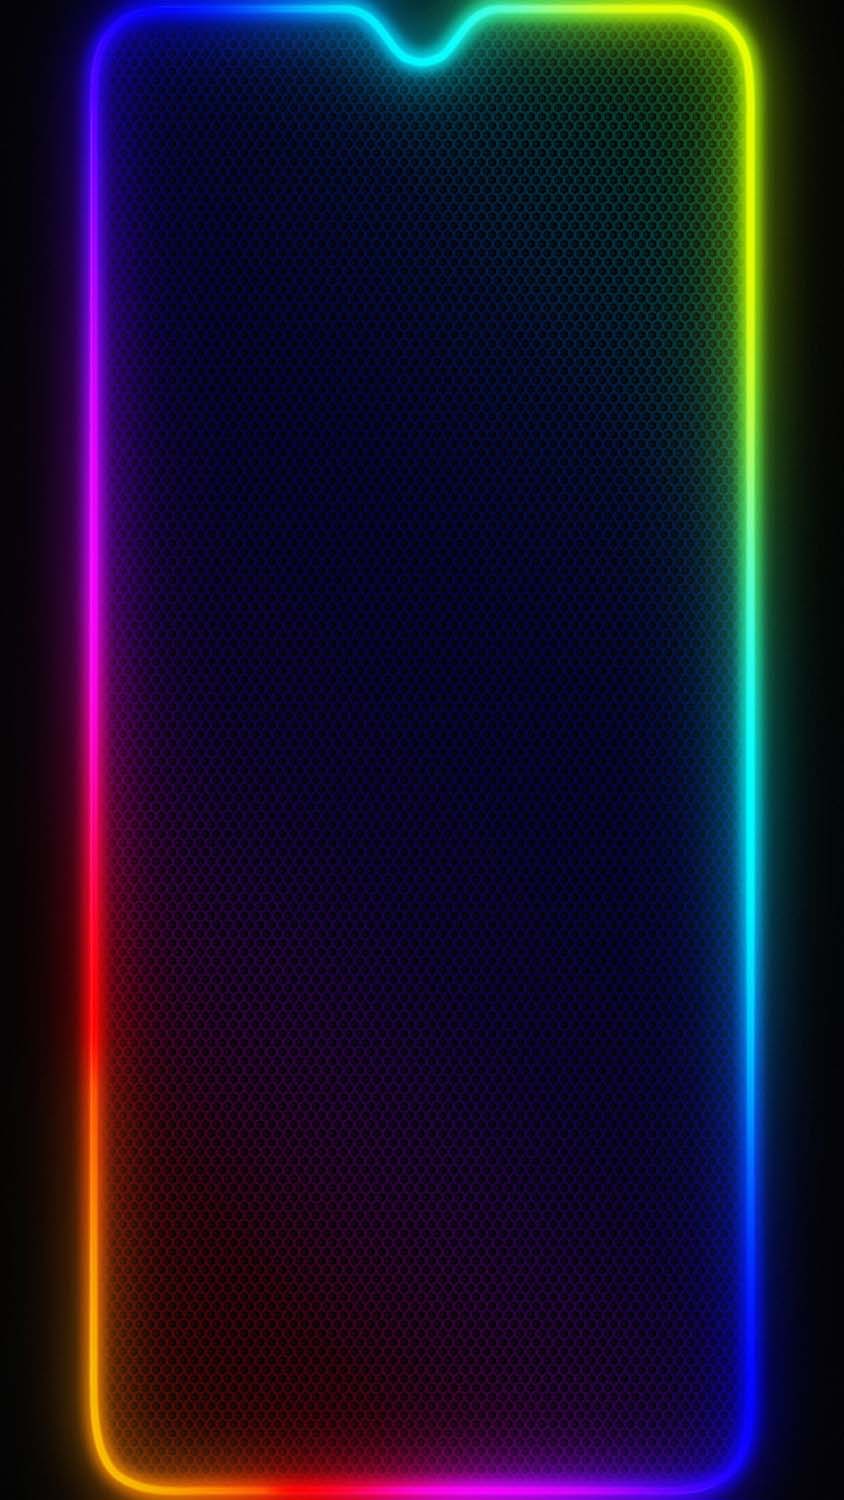 RGB Light Hex Frame Wallpaper HD  IPhone Wallpapers  iPhone Wallpapers